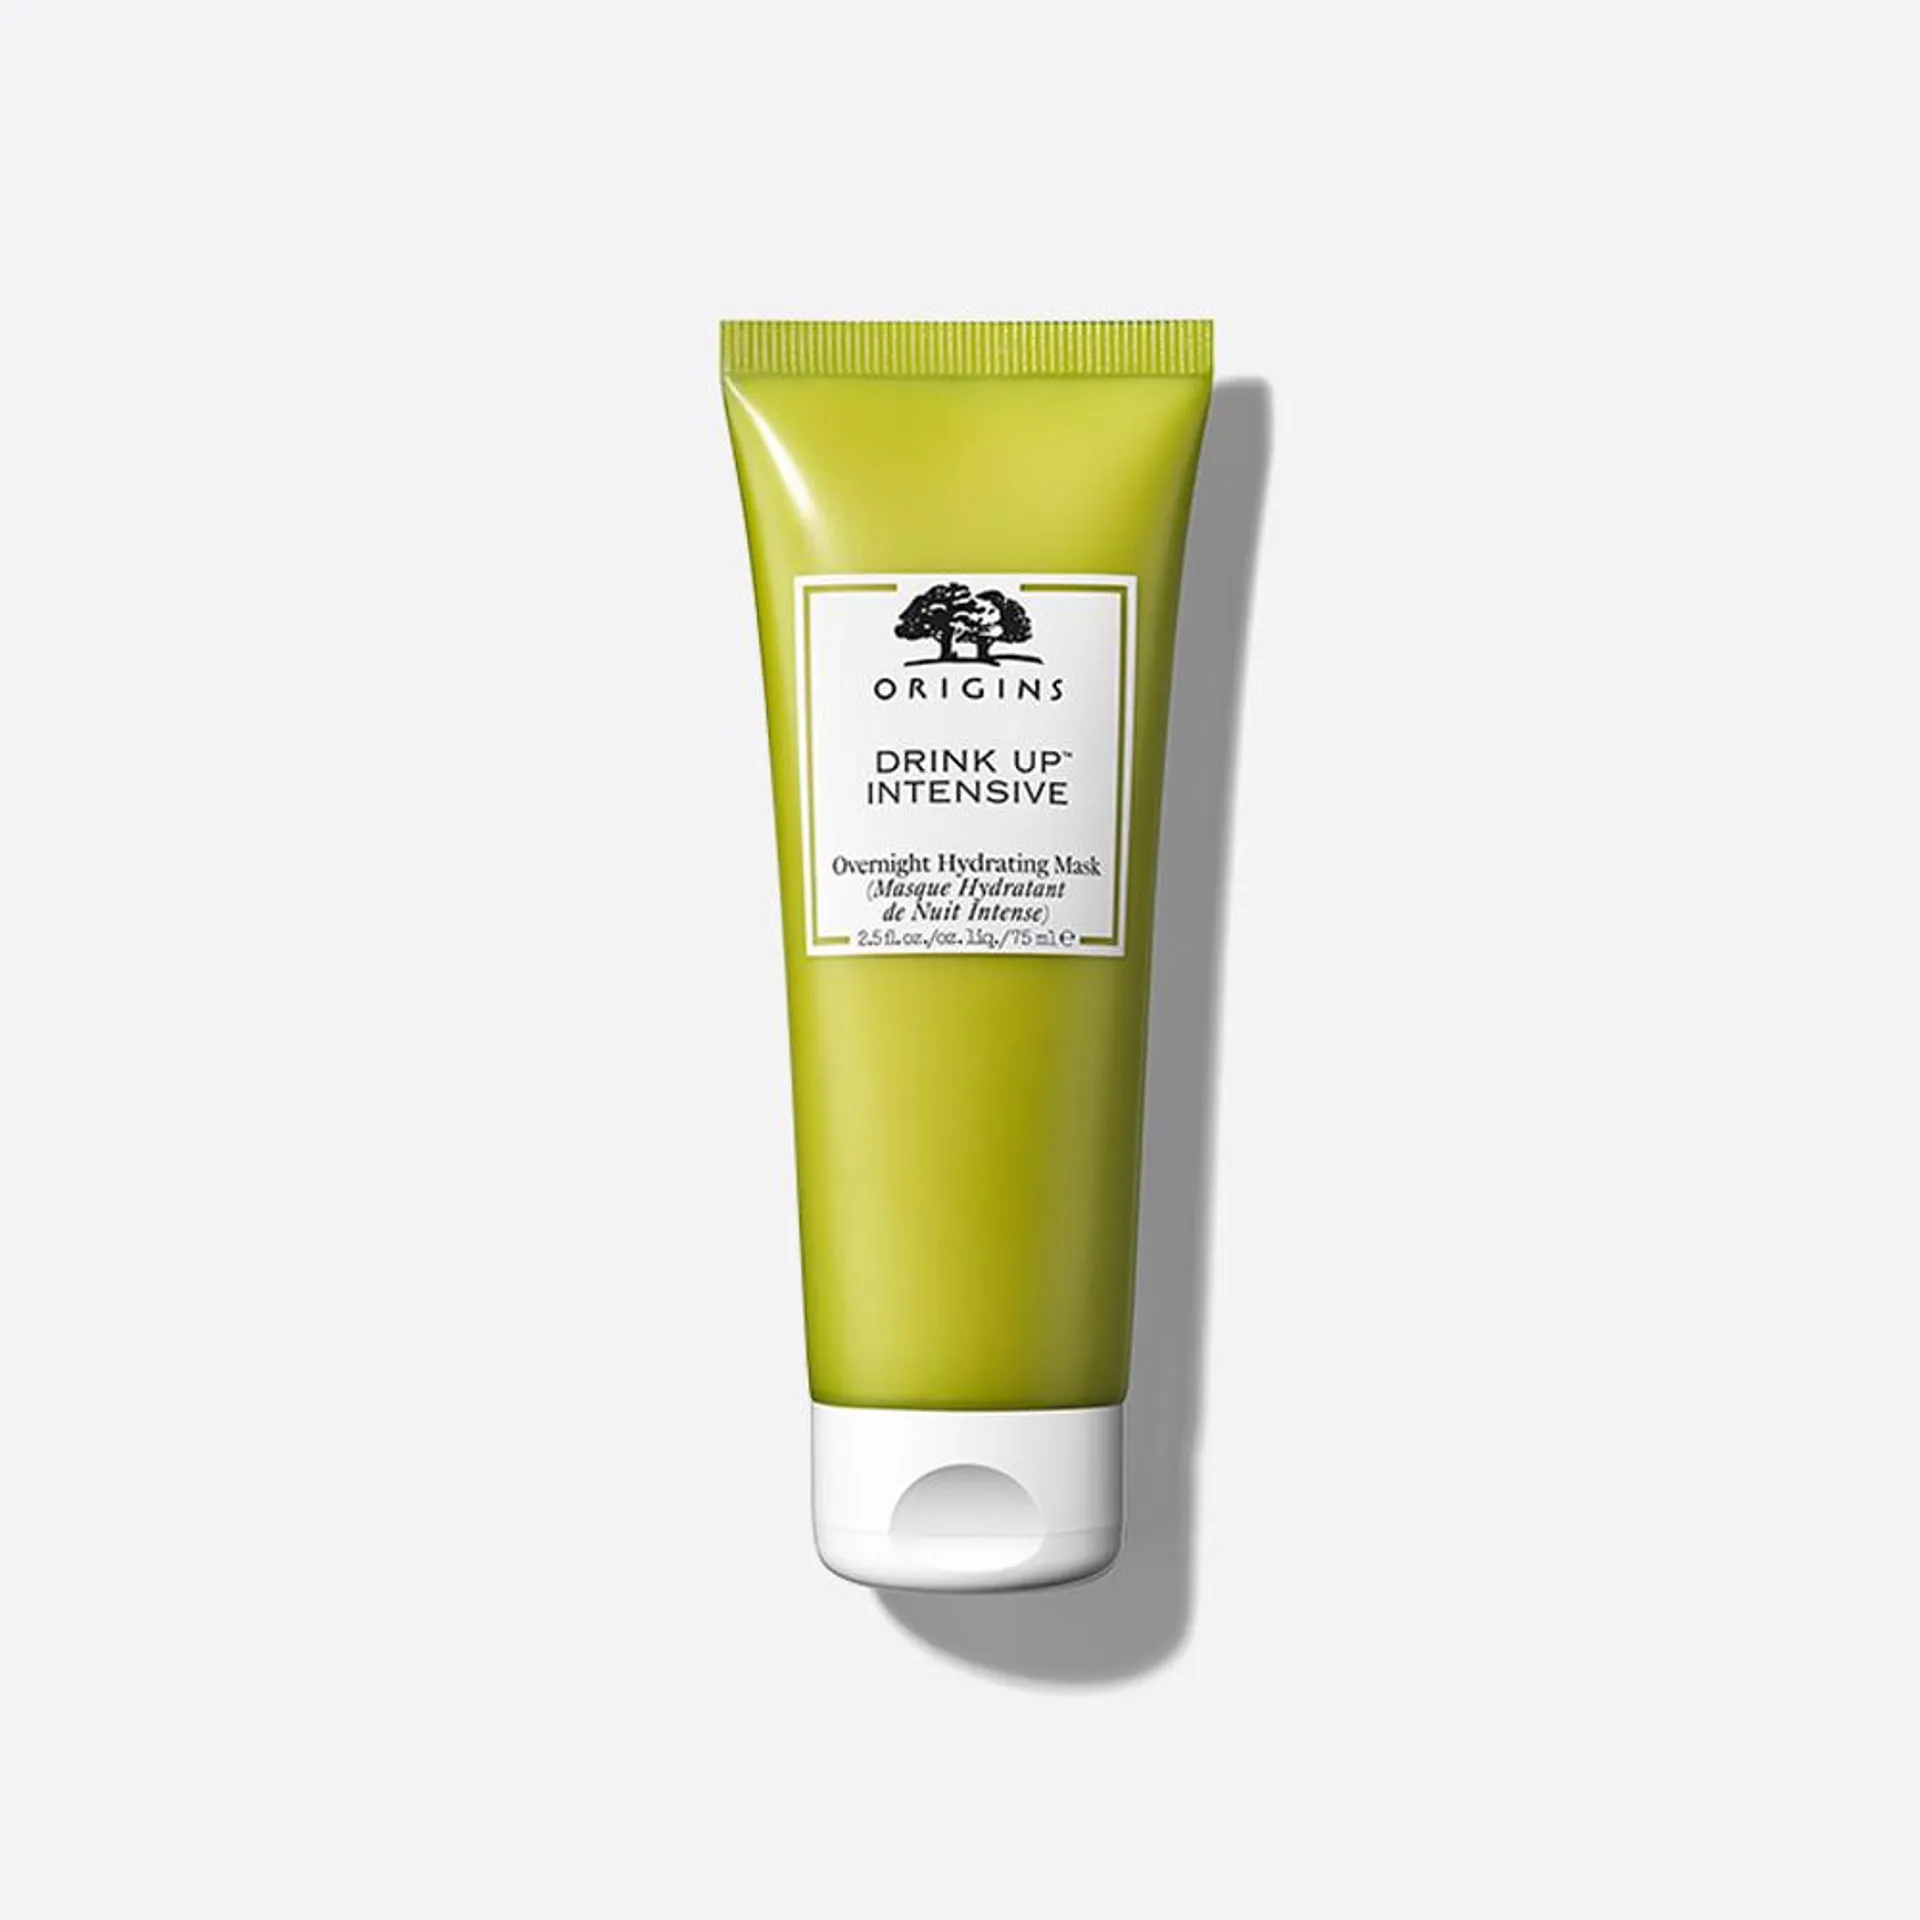 Drink Up™ Intensive Overnight Hydrating Mask with Avocado & Hyaluronic Acid